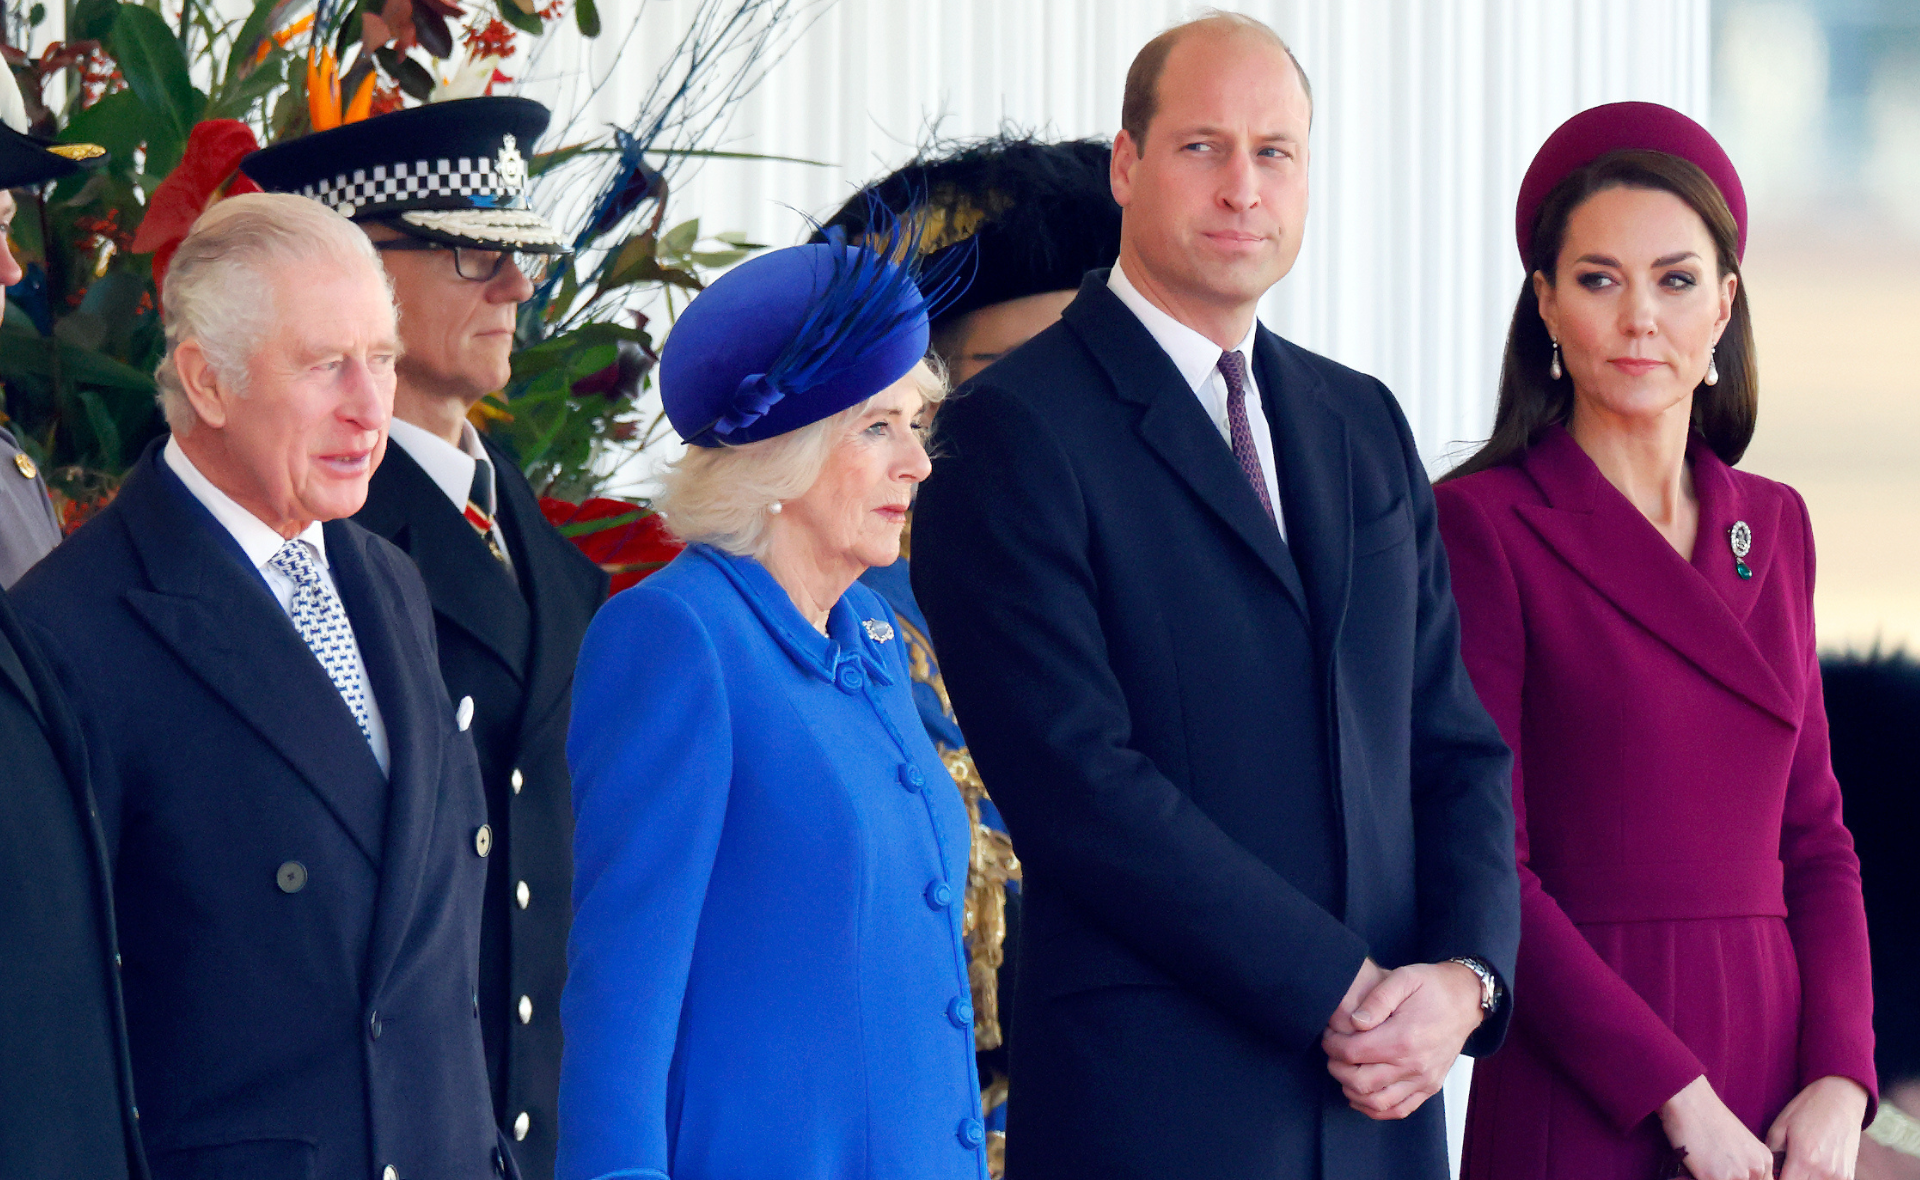 Prince William and Kate Middleton respond to ‘unacceptable’ racism inside Buckingham Palace